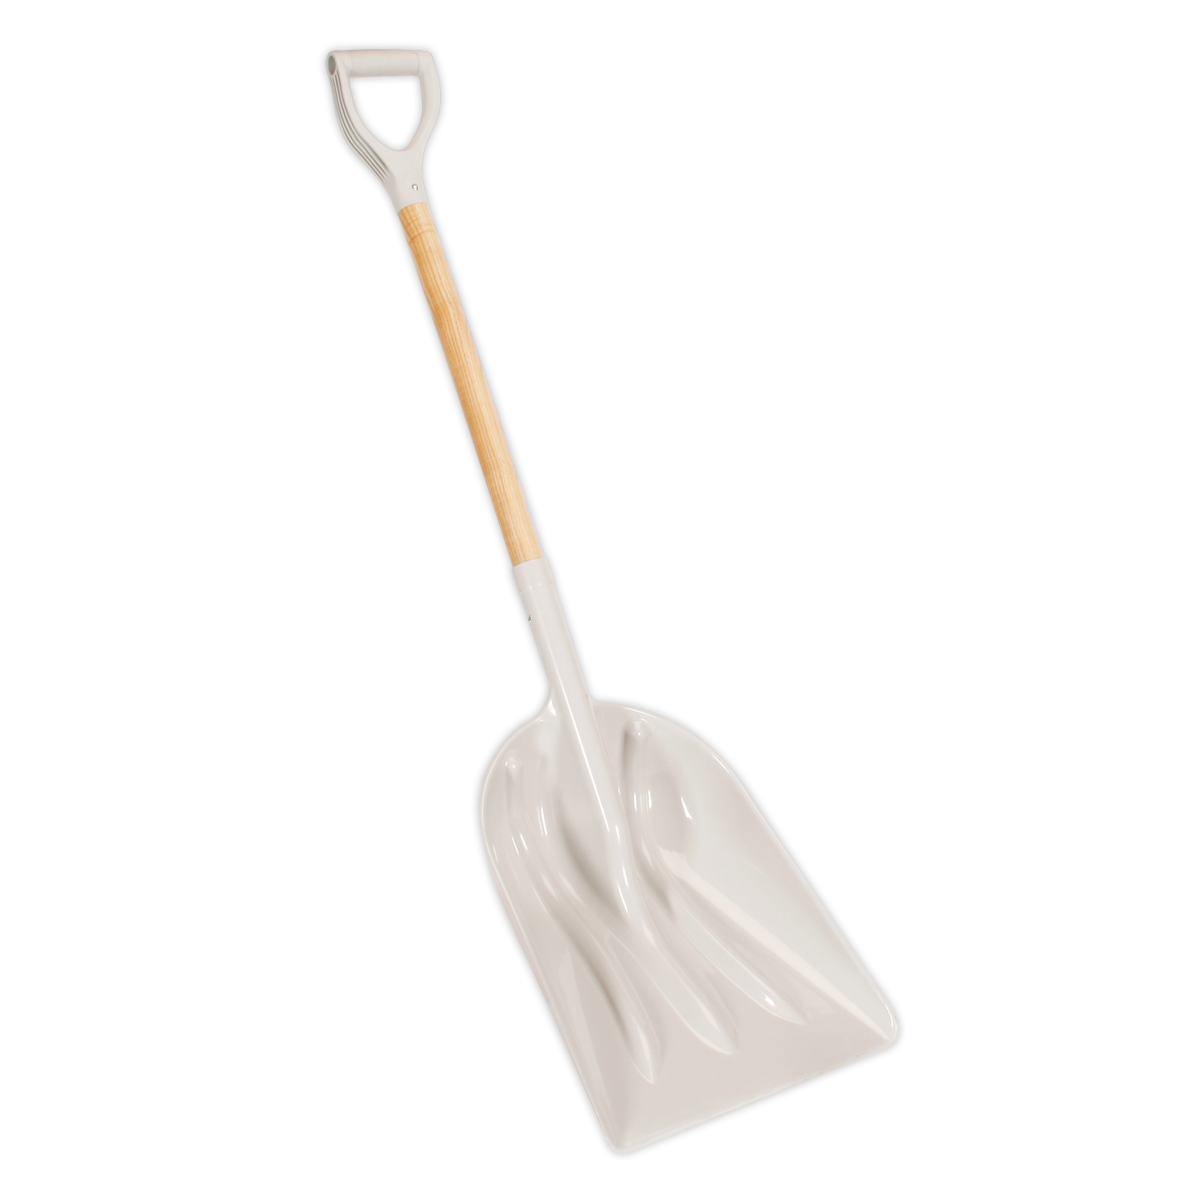 Sealey General-Purpose Shovel with 900mm Wooden Handle